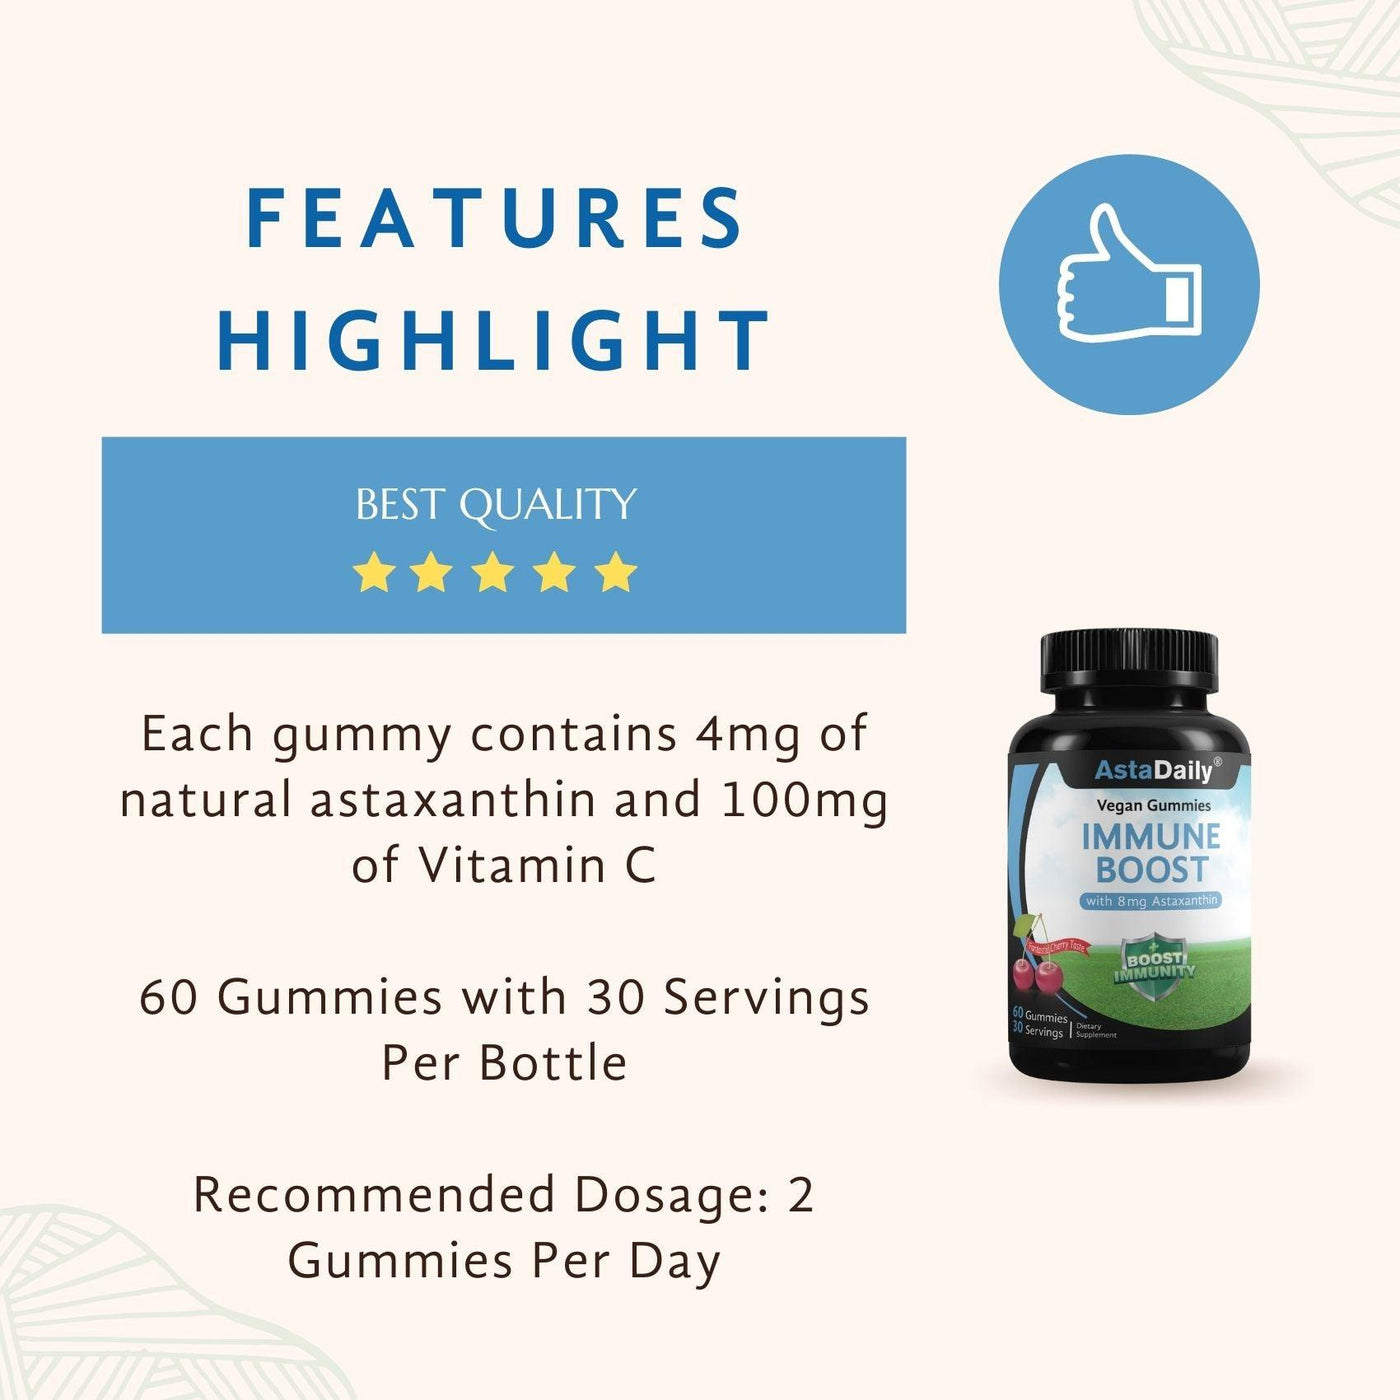 AstaDaily® Immune Boost Vegan Gummies (BLUE-30 servings) - 4mg Natural Astaxanthin with 100mg Vitamin C - Iconthin Biotech Corp.